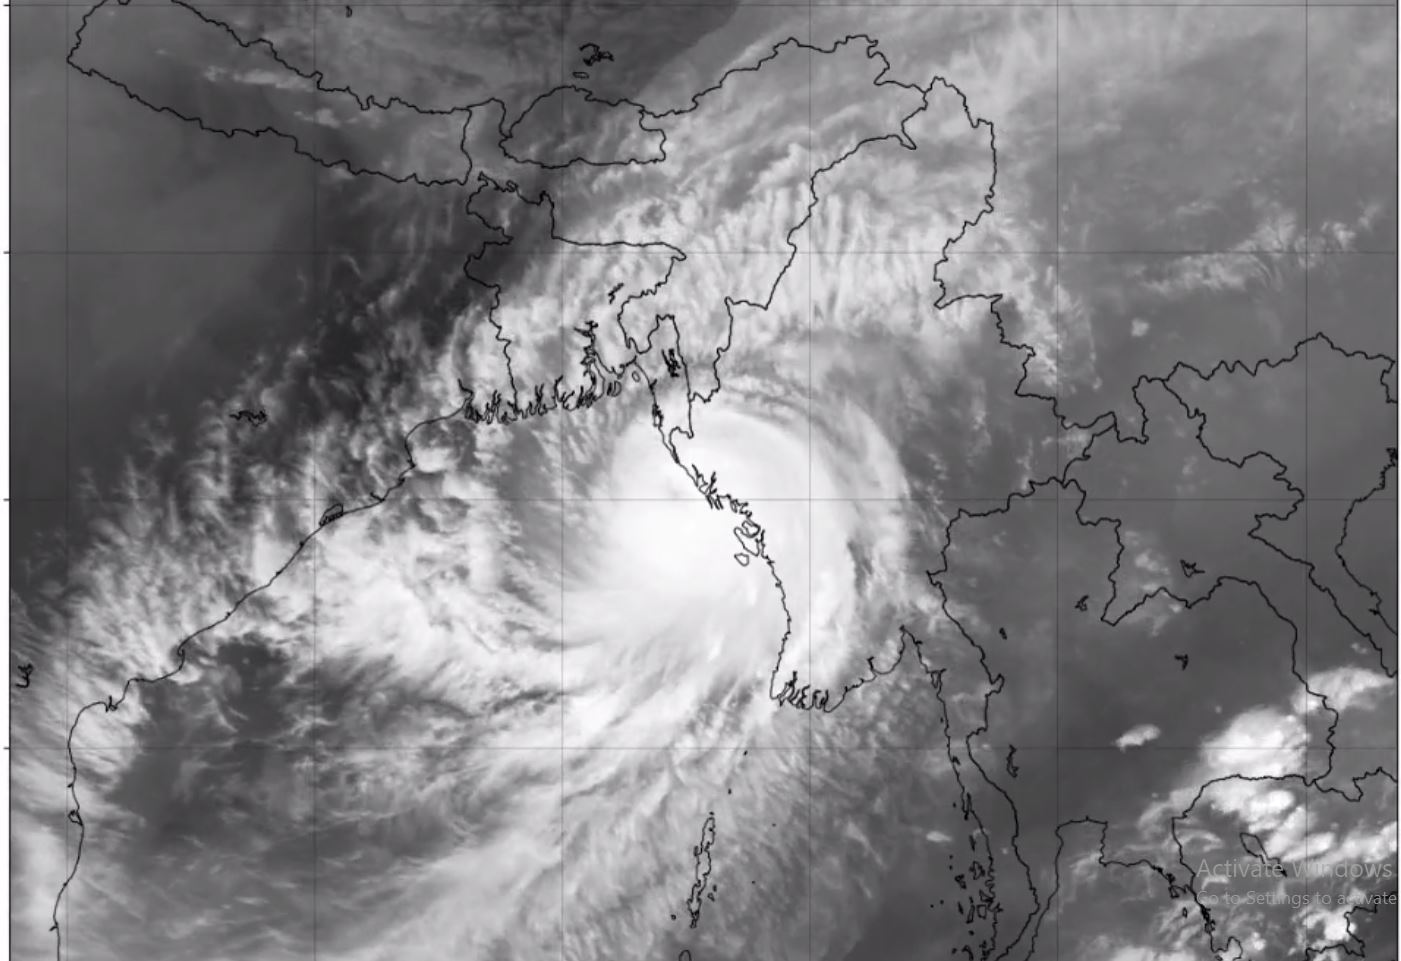 x Extremely Severe Cyclonic Storm “Mocha” is making landfall